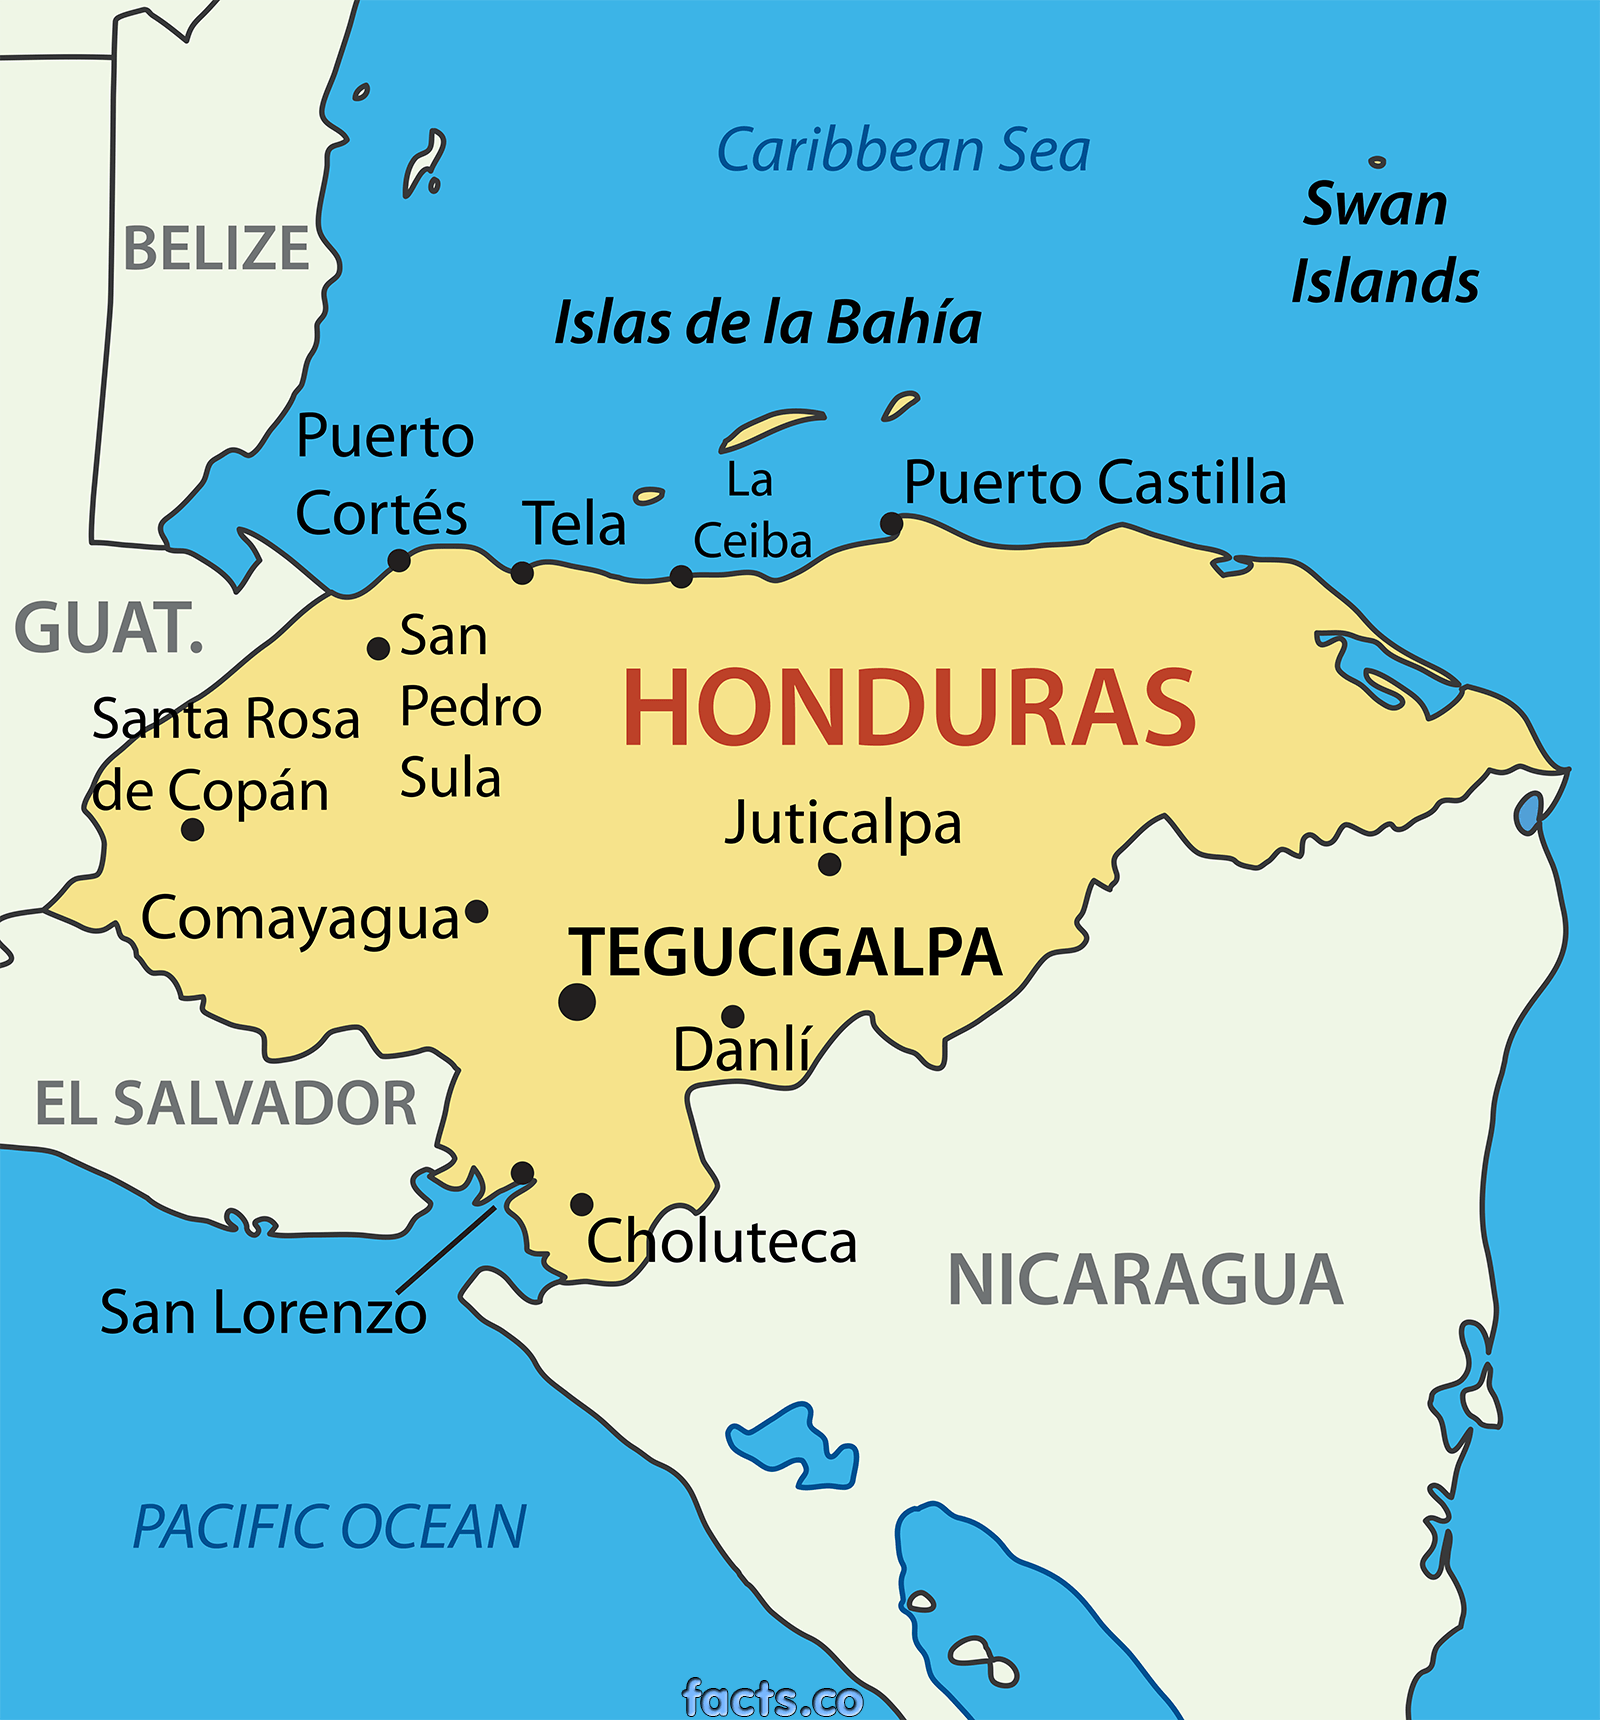 INTERNATIONAL ORGANIZATIONS DEMAND TRANSPARENCY AND RESPECT FOR THE VOTE IN HONDURAS